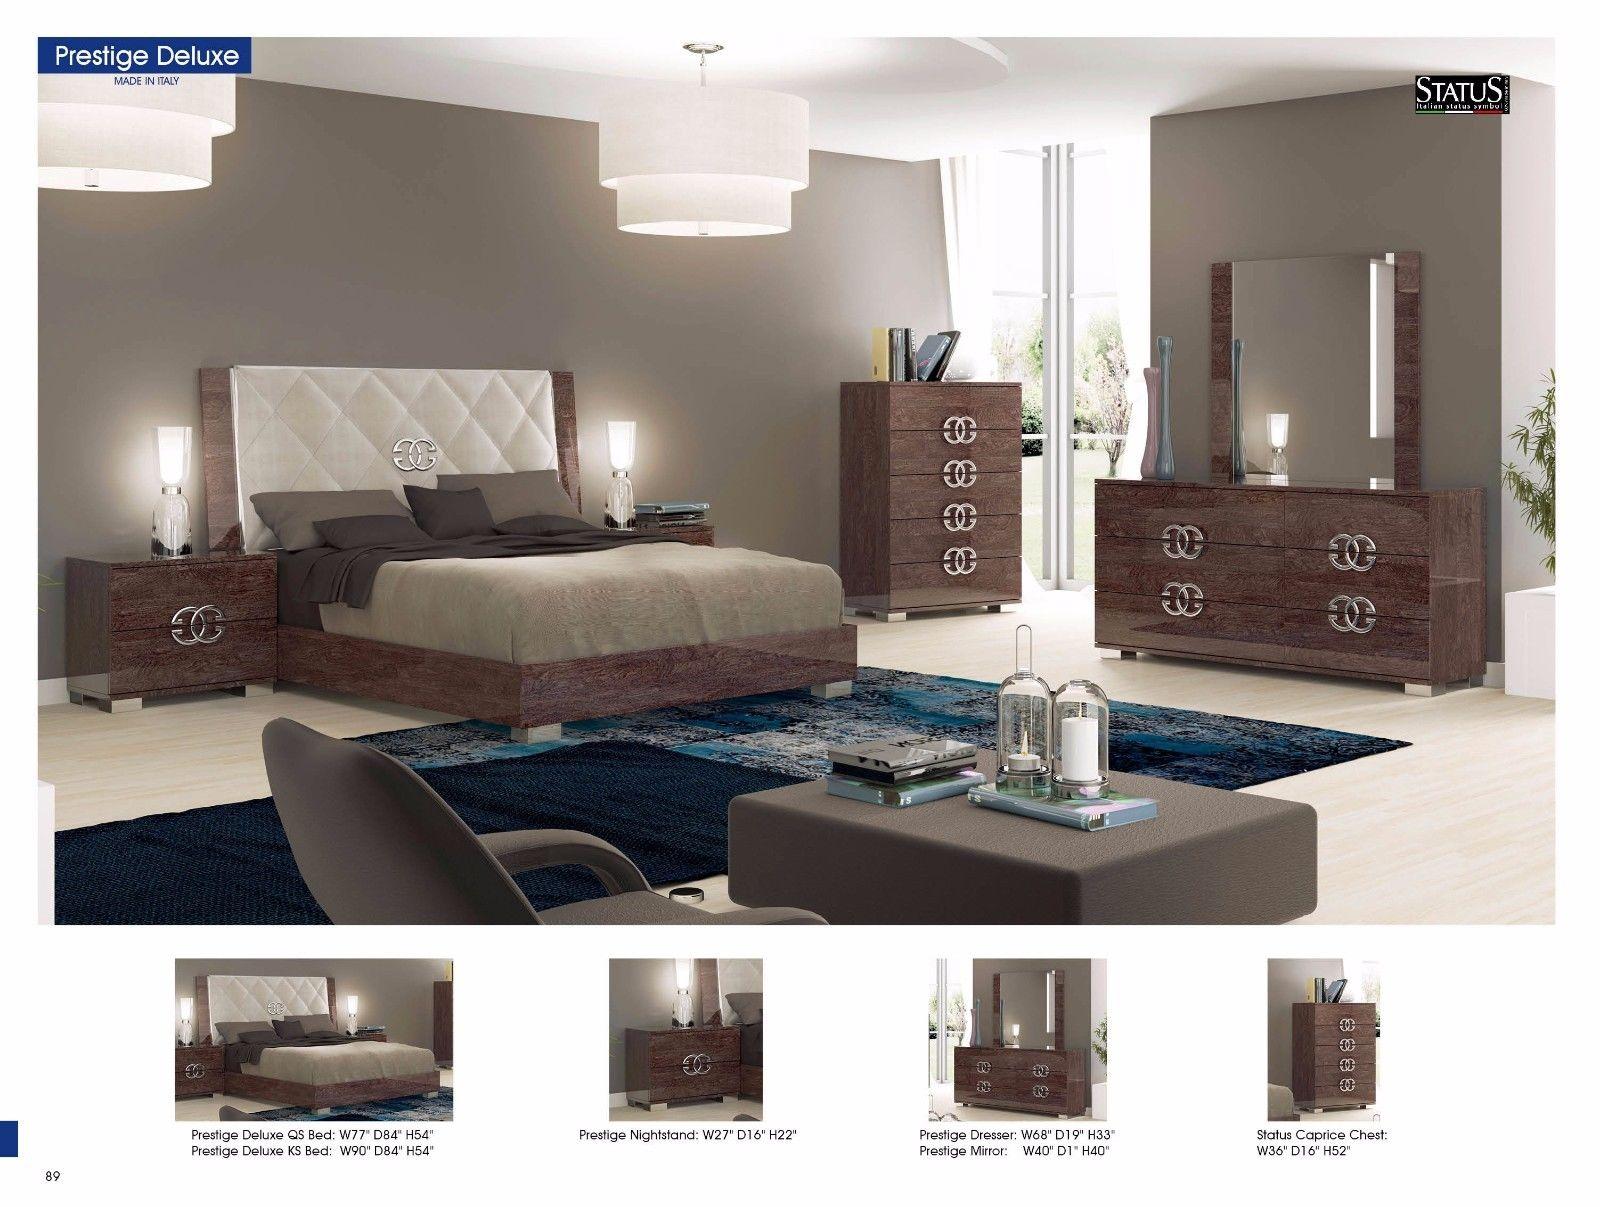 

    
 Order  Glossy Finish Upholstered Headboard King Bedroom Set 5Pcs Made in Italy ESF Prestige Deluxe
